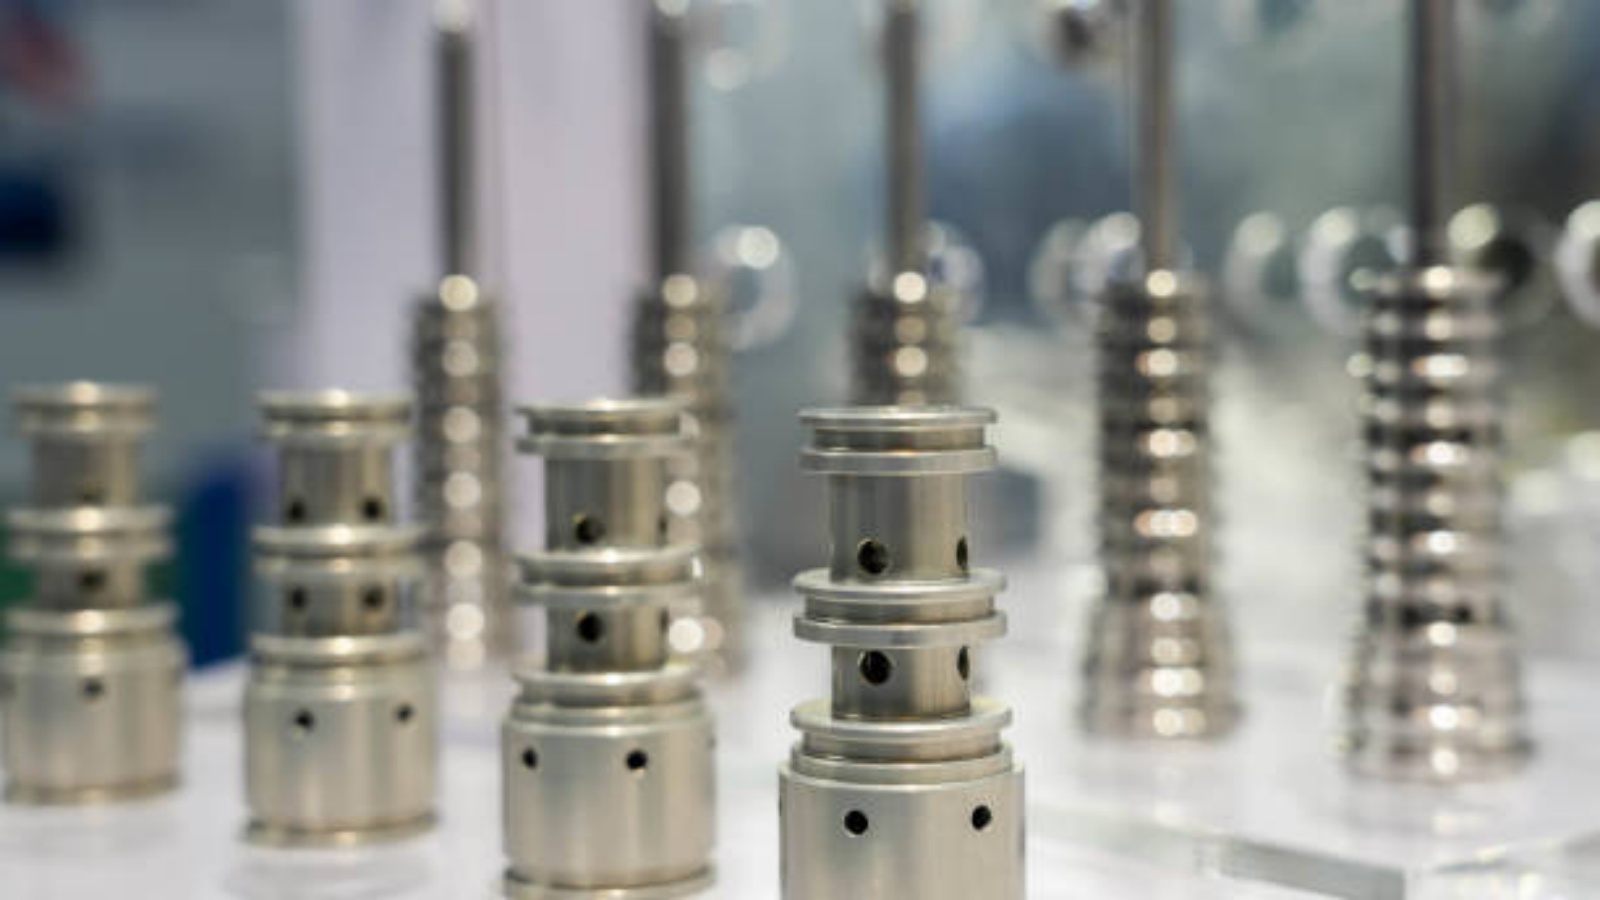 PDC Bit Manufacturers: A Comprehensive Guide to the Leading Manufacturers in the Industry